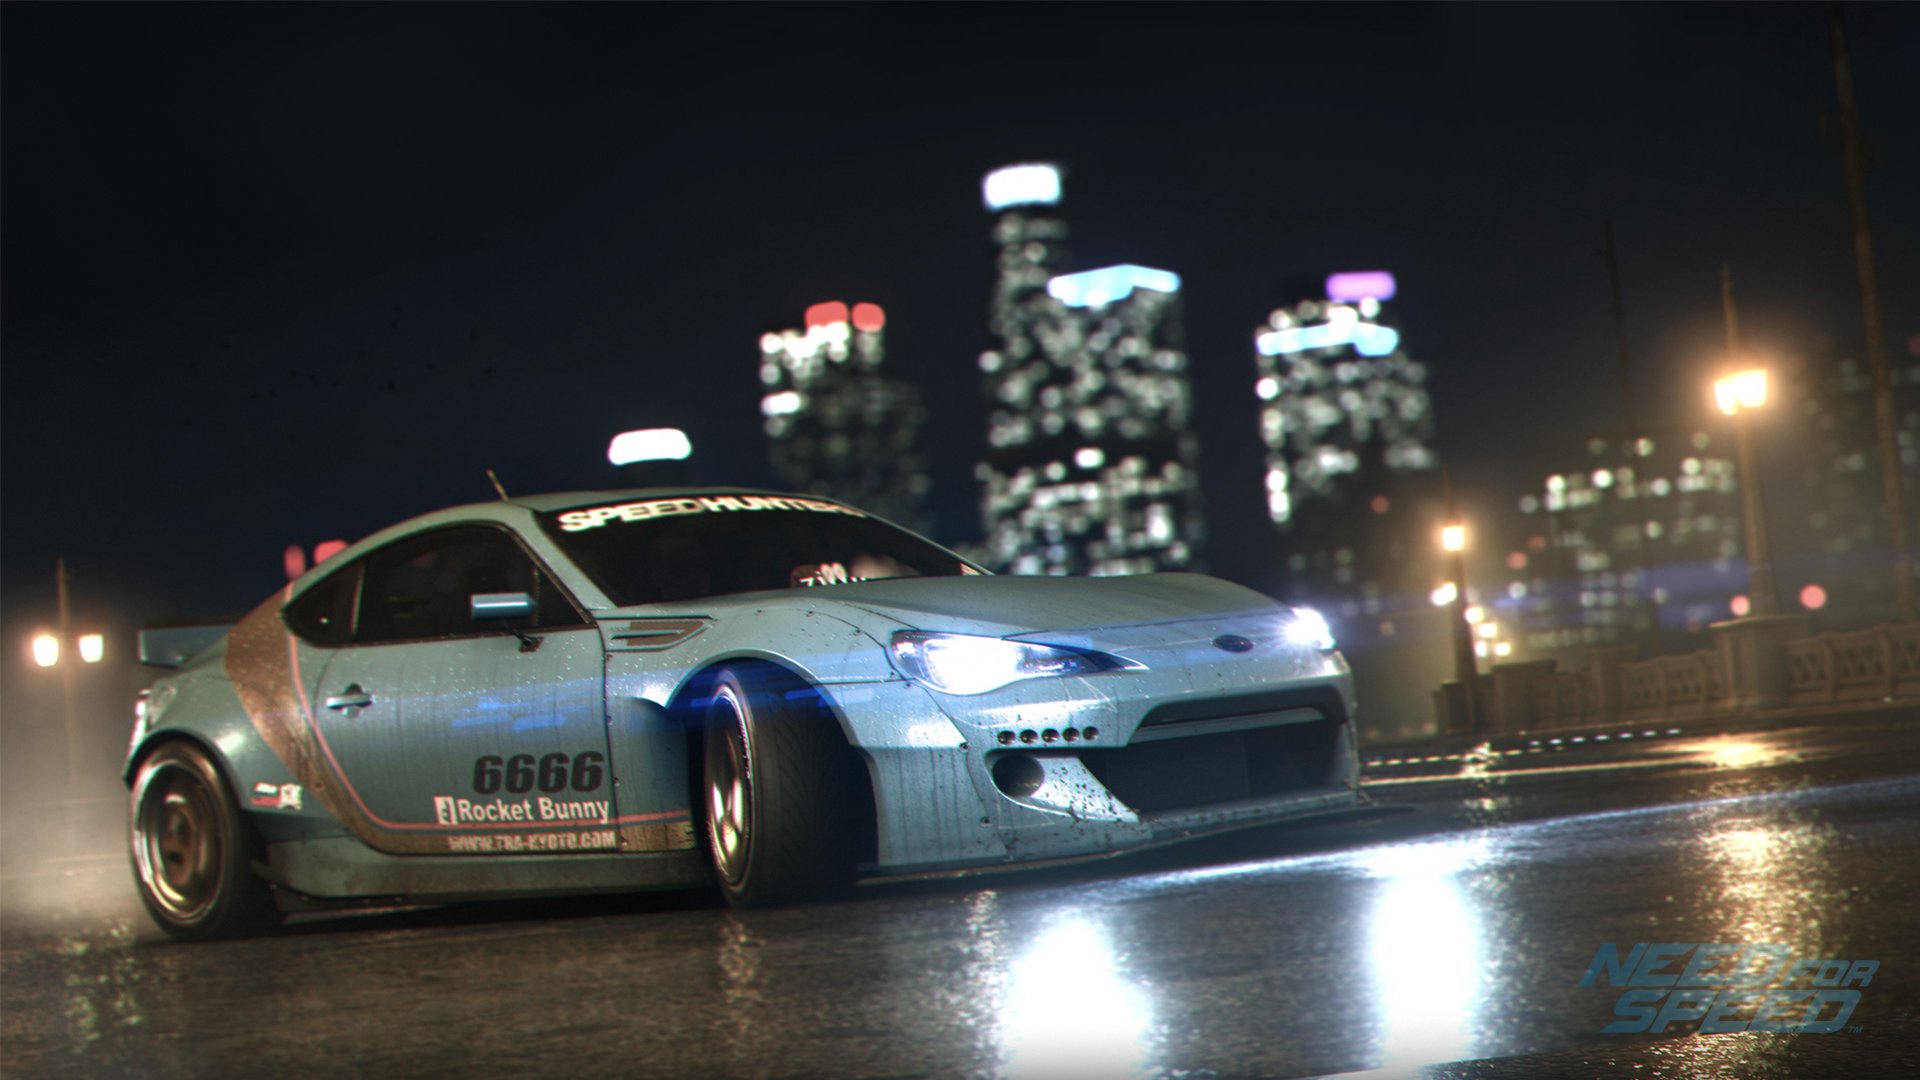 need for speed 2015 pc $10.00